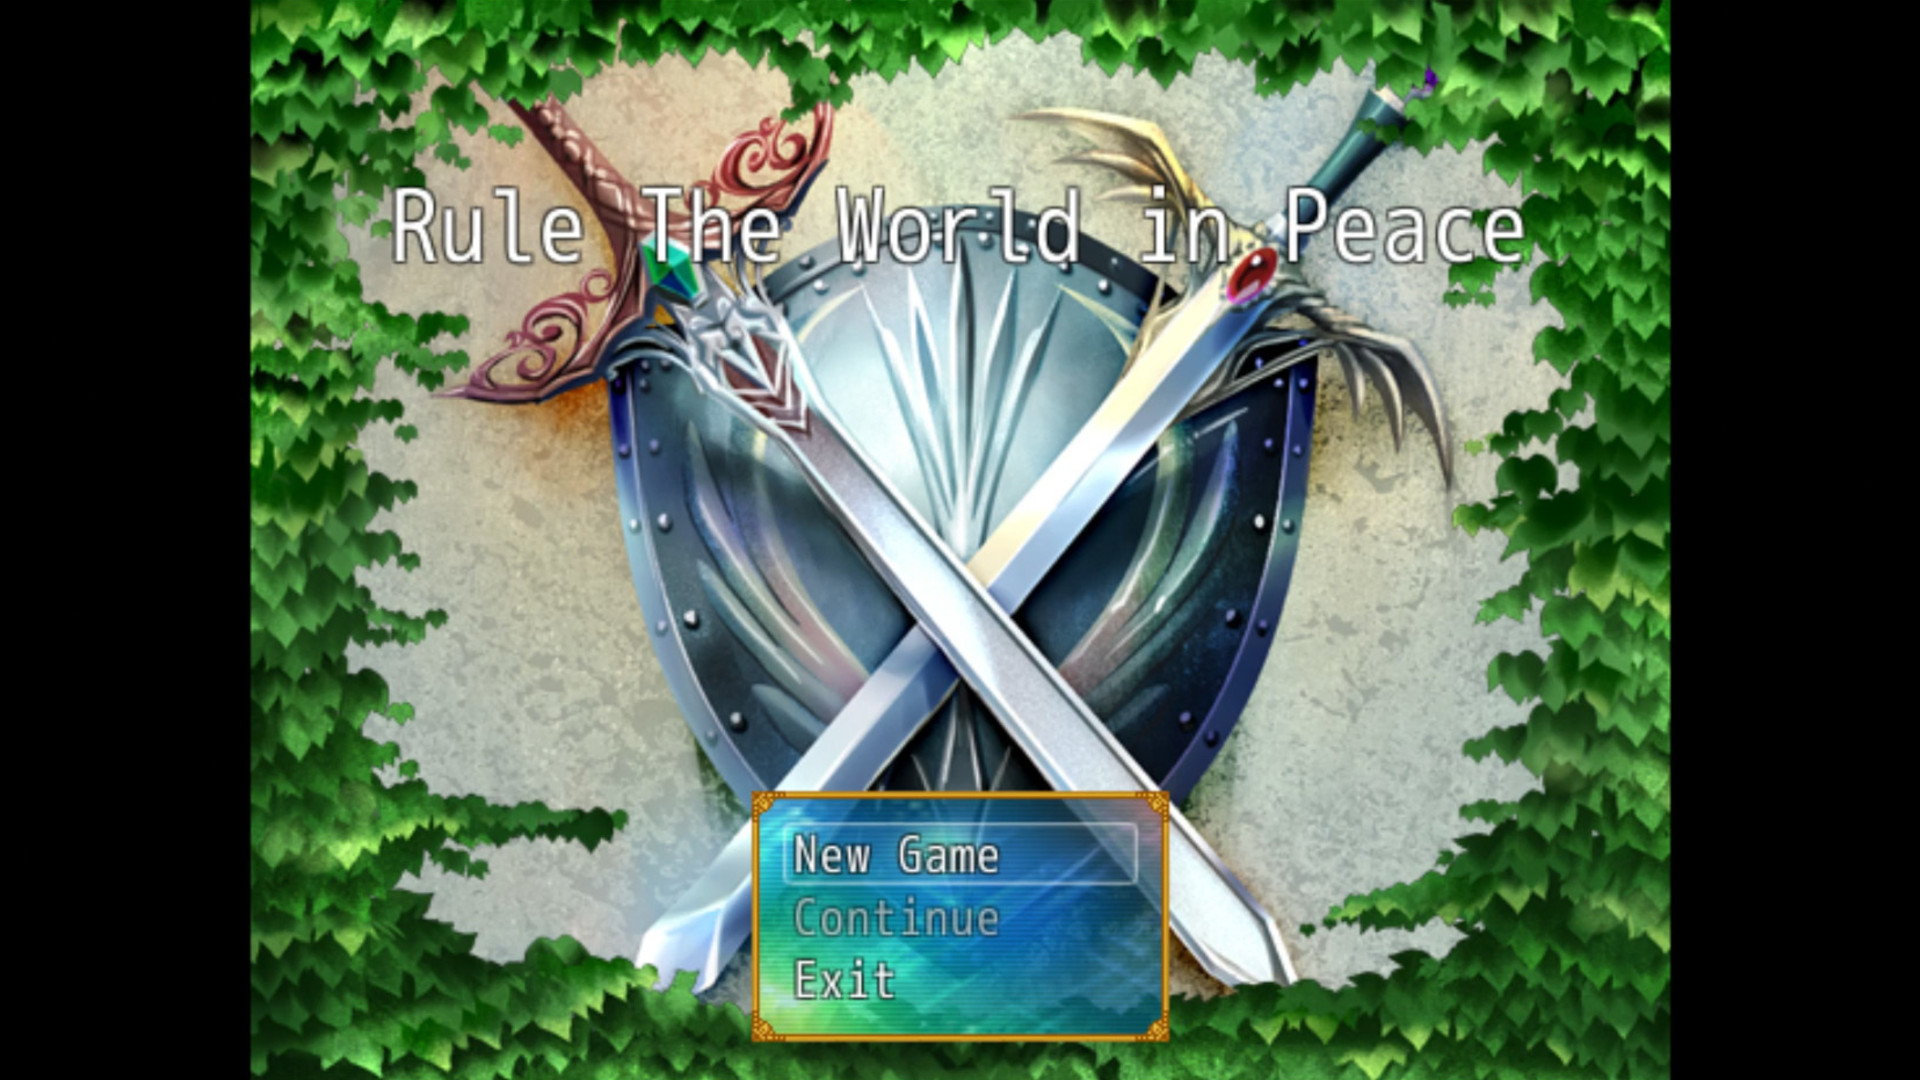 Selling This in The First Place Was a Bold Choice – Rule The World in Peace [Free-to-Play Friday]